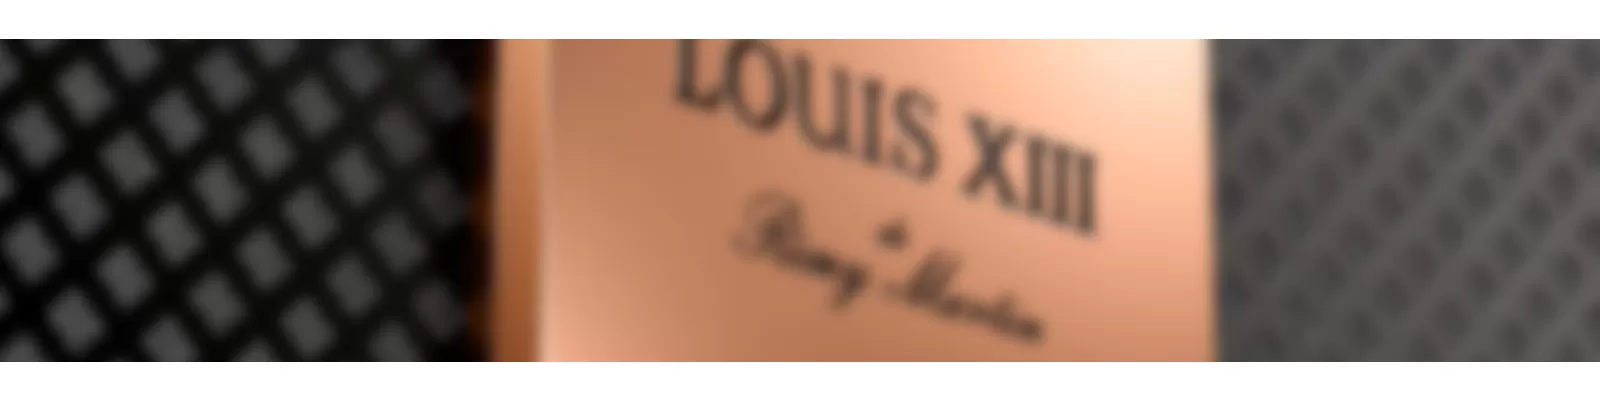 Download hd Logo Louis Vuitton - Louis Vuitton Ysl Logo Clipart and use the  free clipart for your creative project.